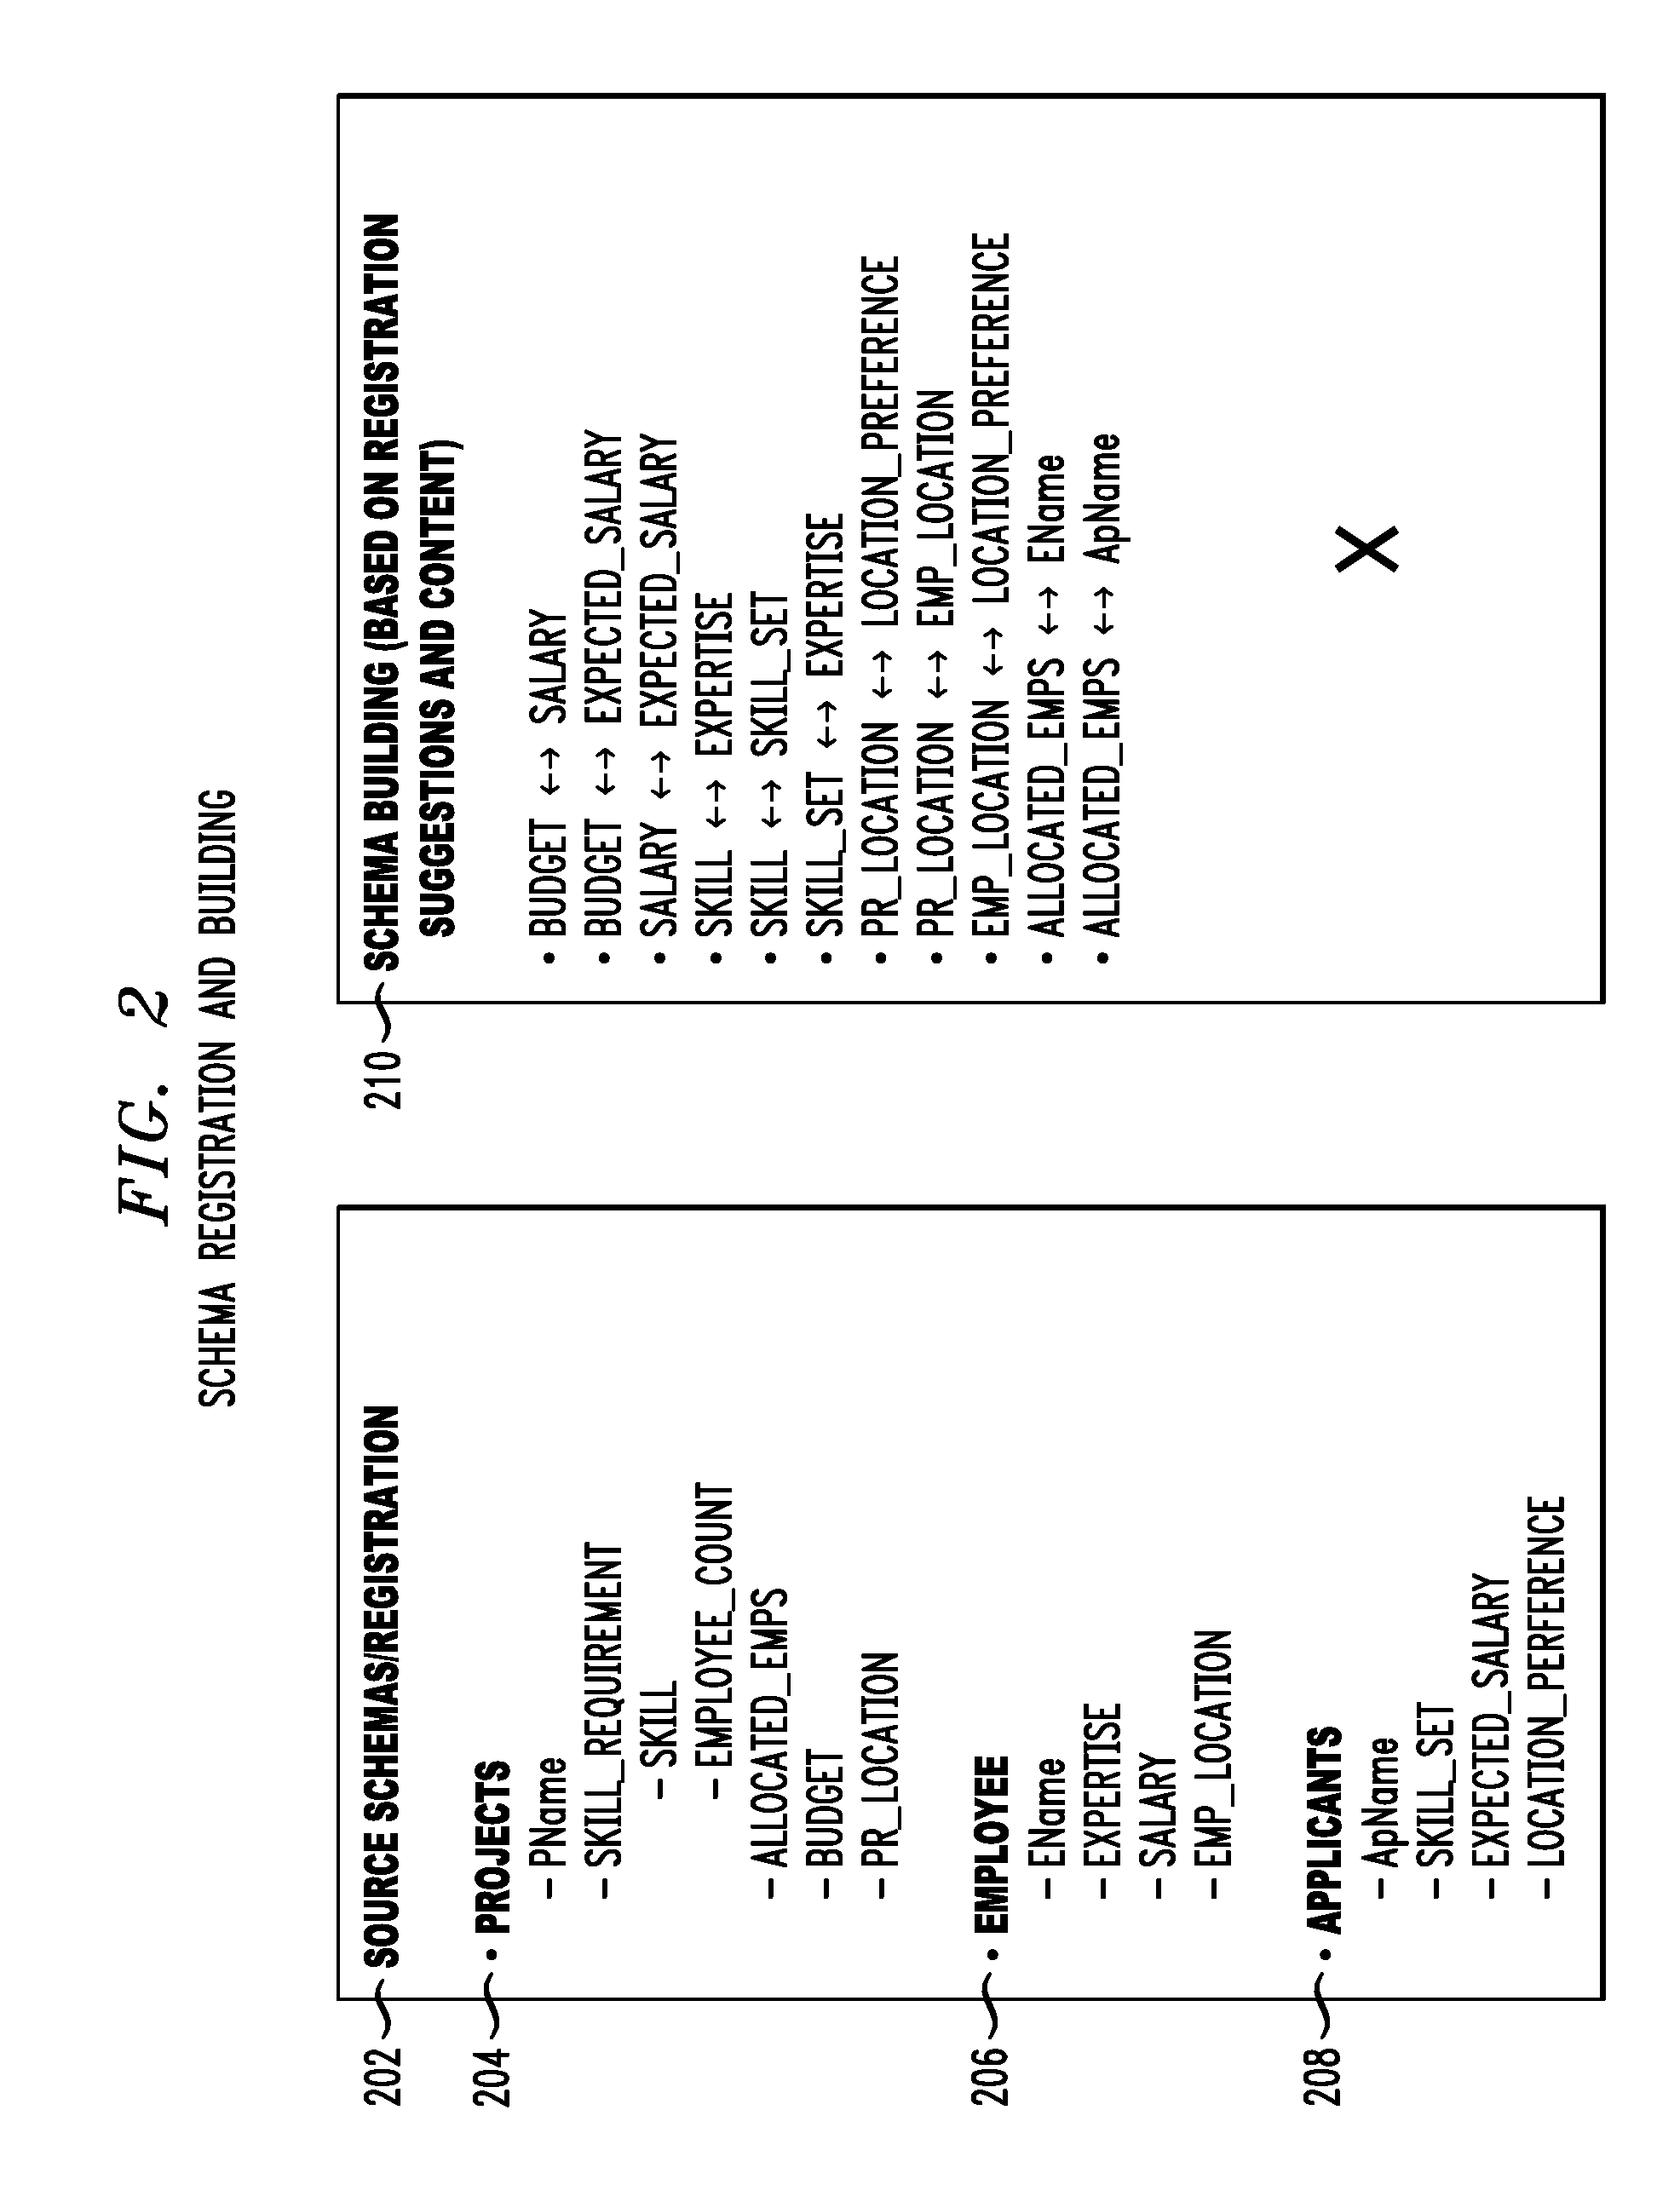 Method for assembly of personalized enterprise information integrators over conjunctive queries